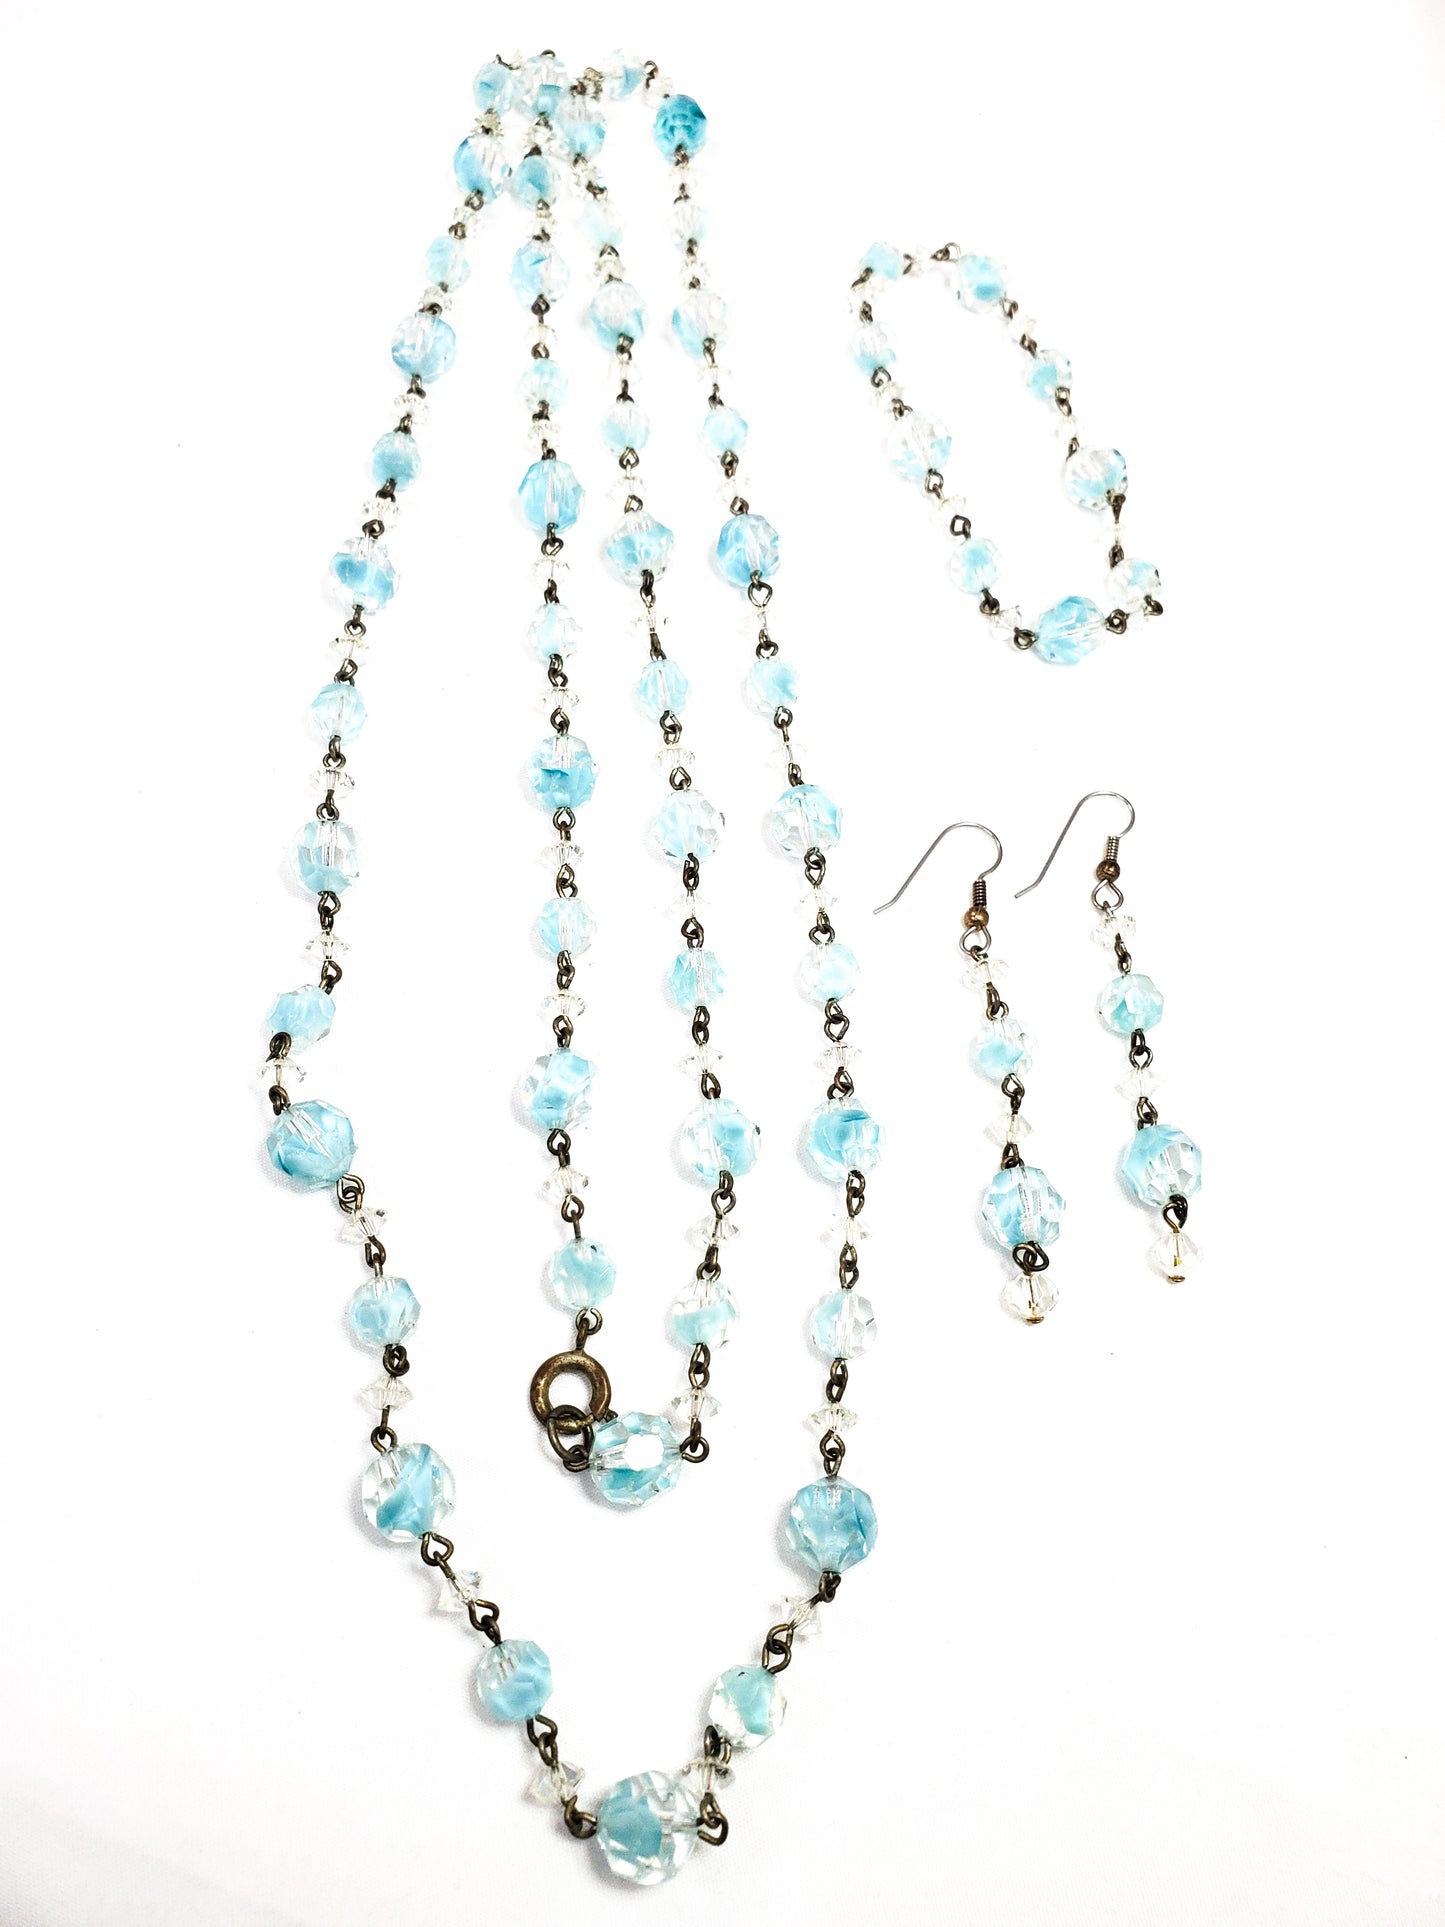 Antique blue and clear bi-colored lead glass faceted beads on brass chain demi parure set